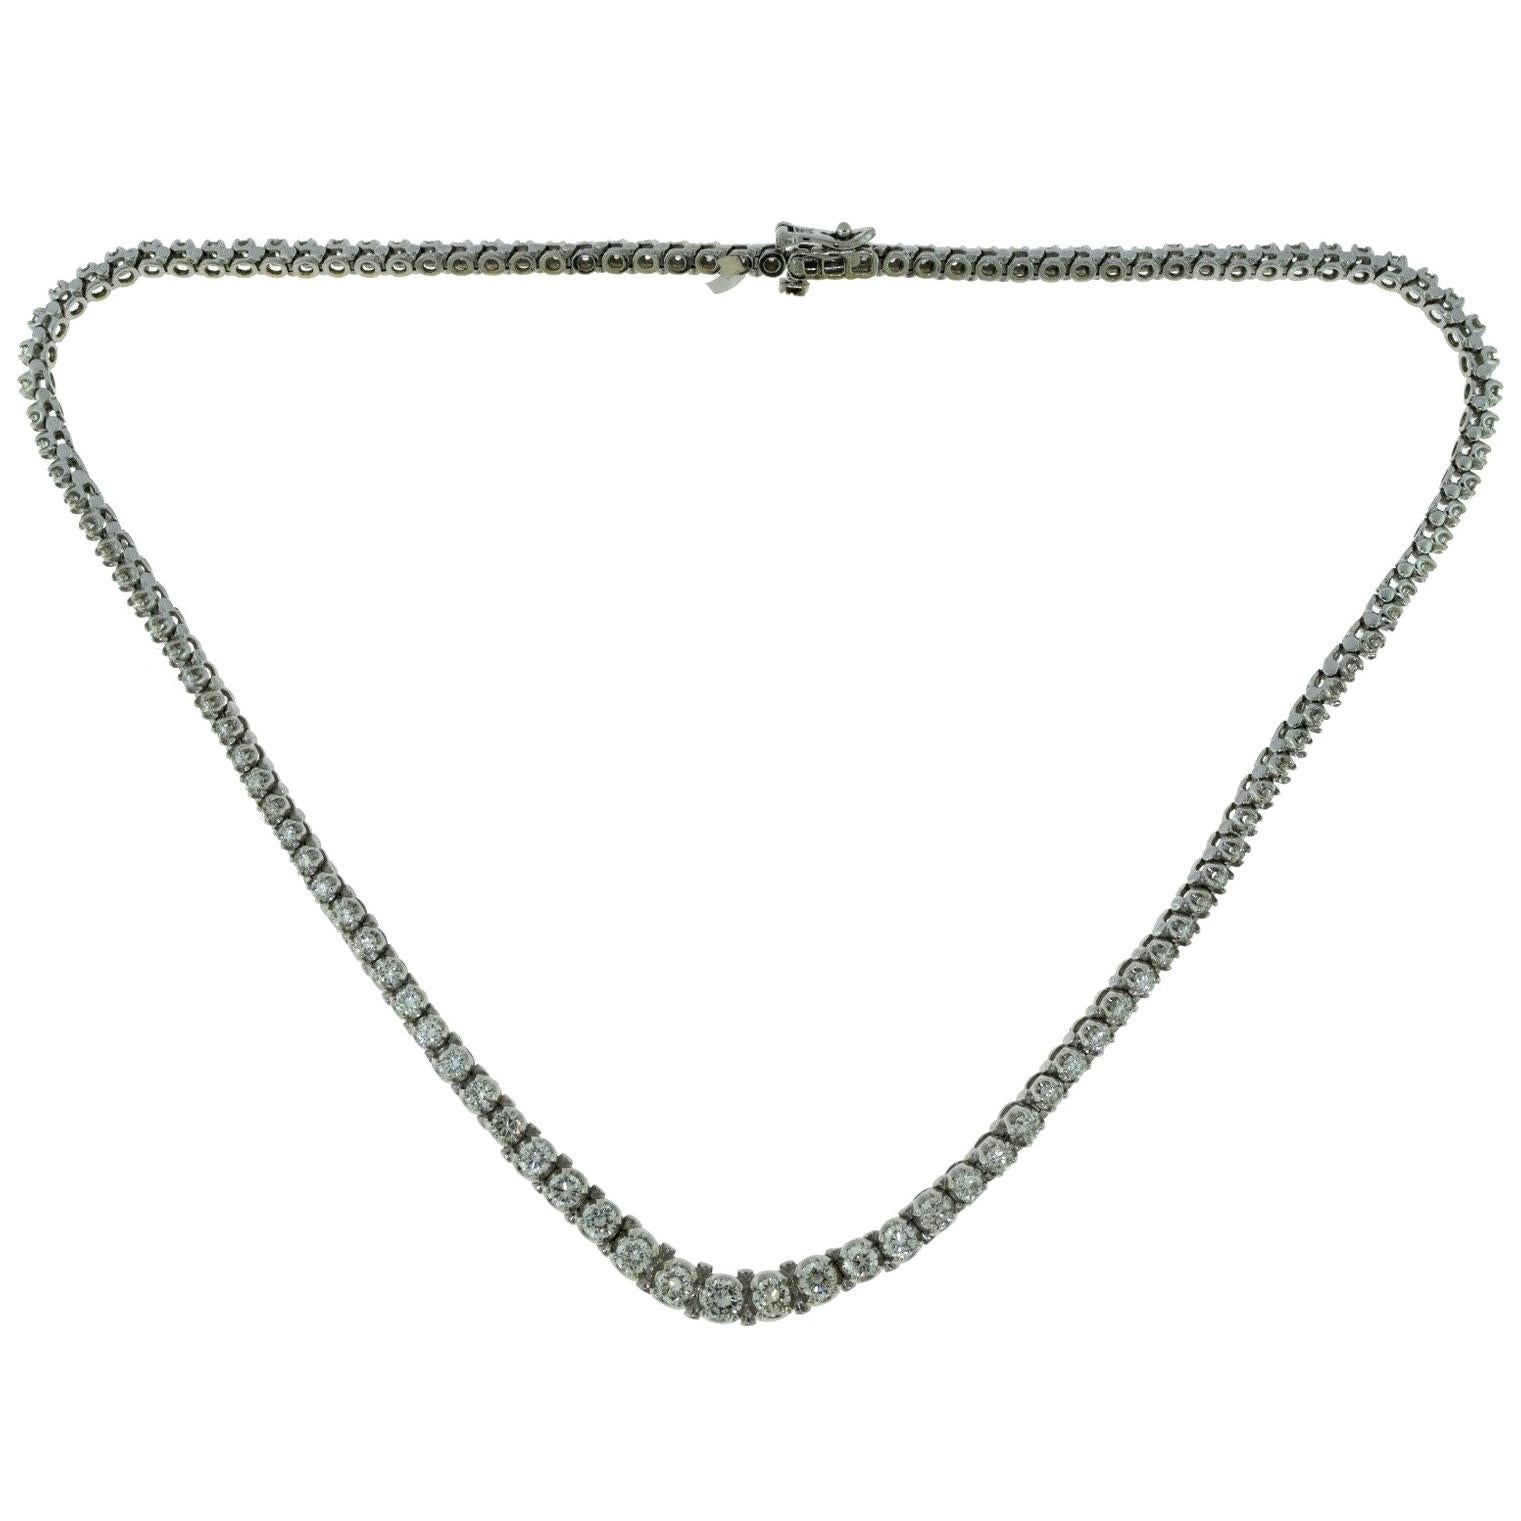 8 Total Carat Weight Diamond Graduated Tennis Necklace in White Gold